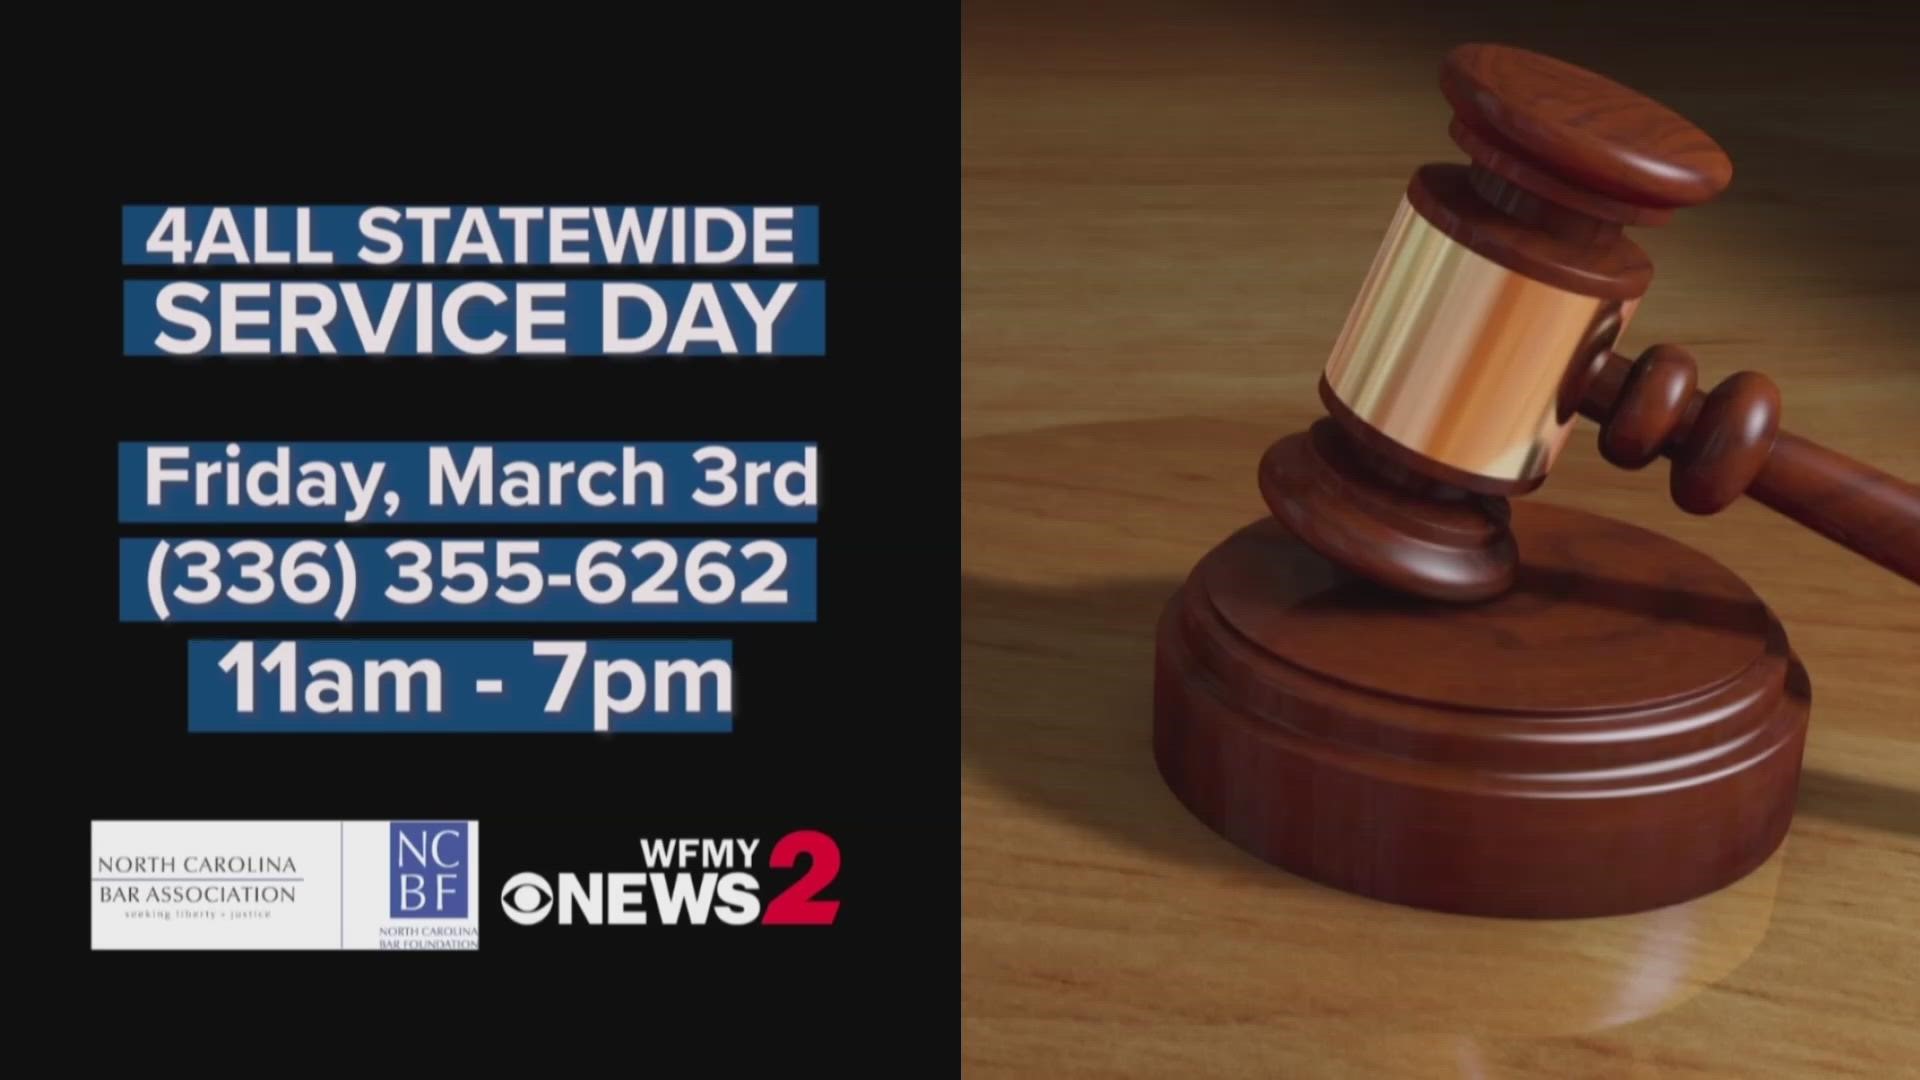 Friday is 4ALL Service Day. You can talk to a lawyer and get free legal information.